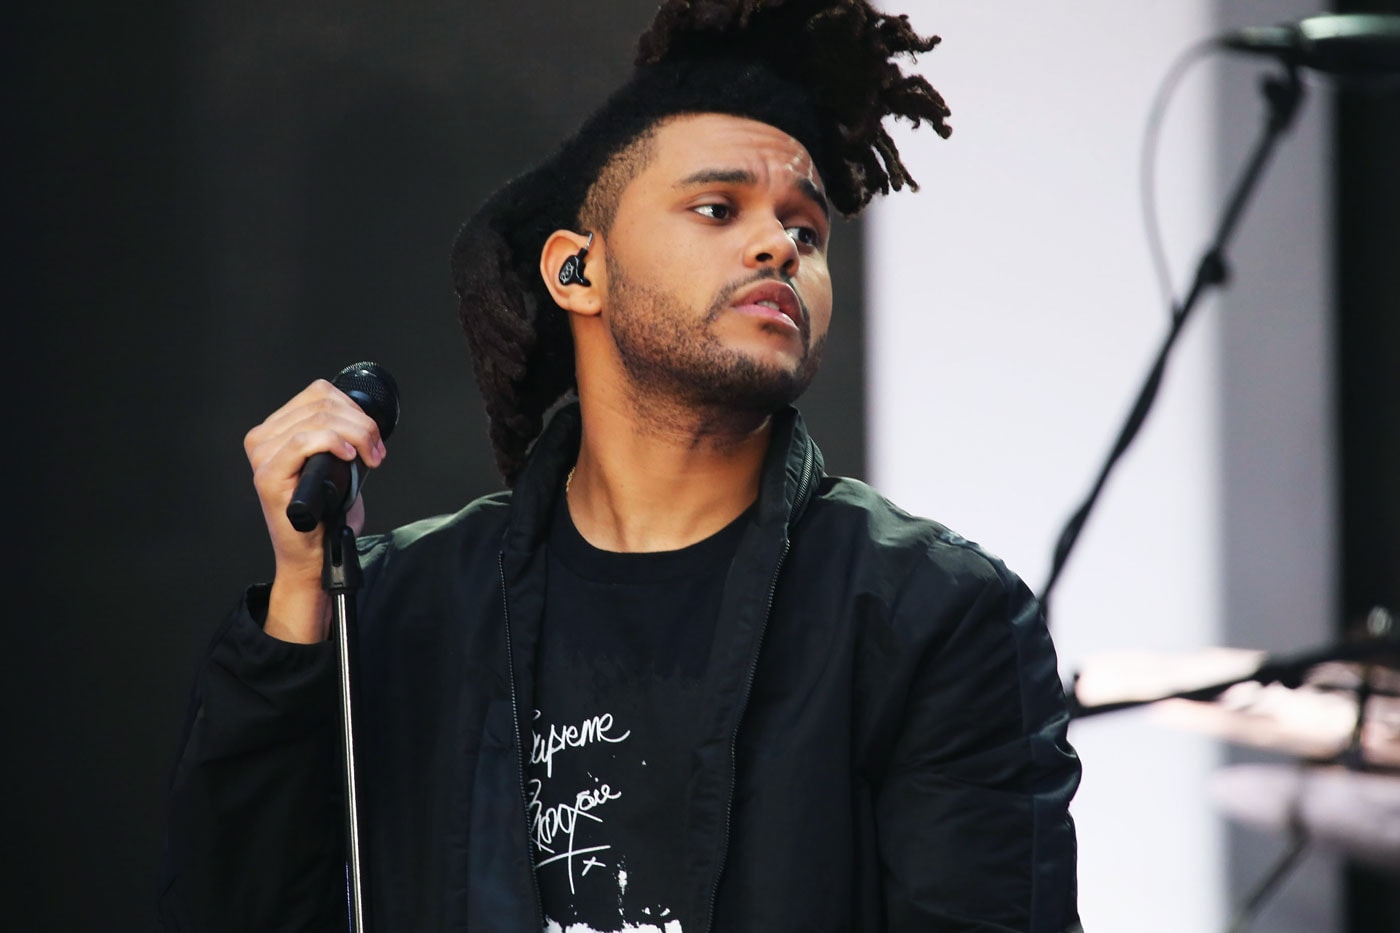 The Weeknd May Have Plagiarized His "Can't Feel My Face" Video